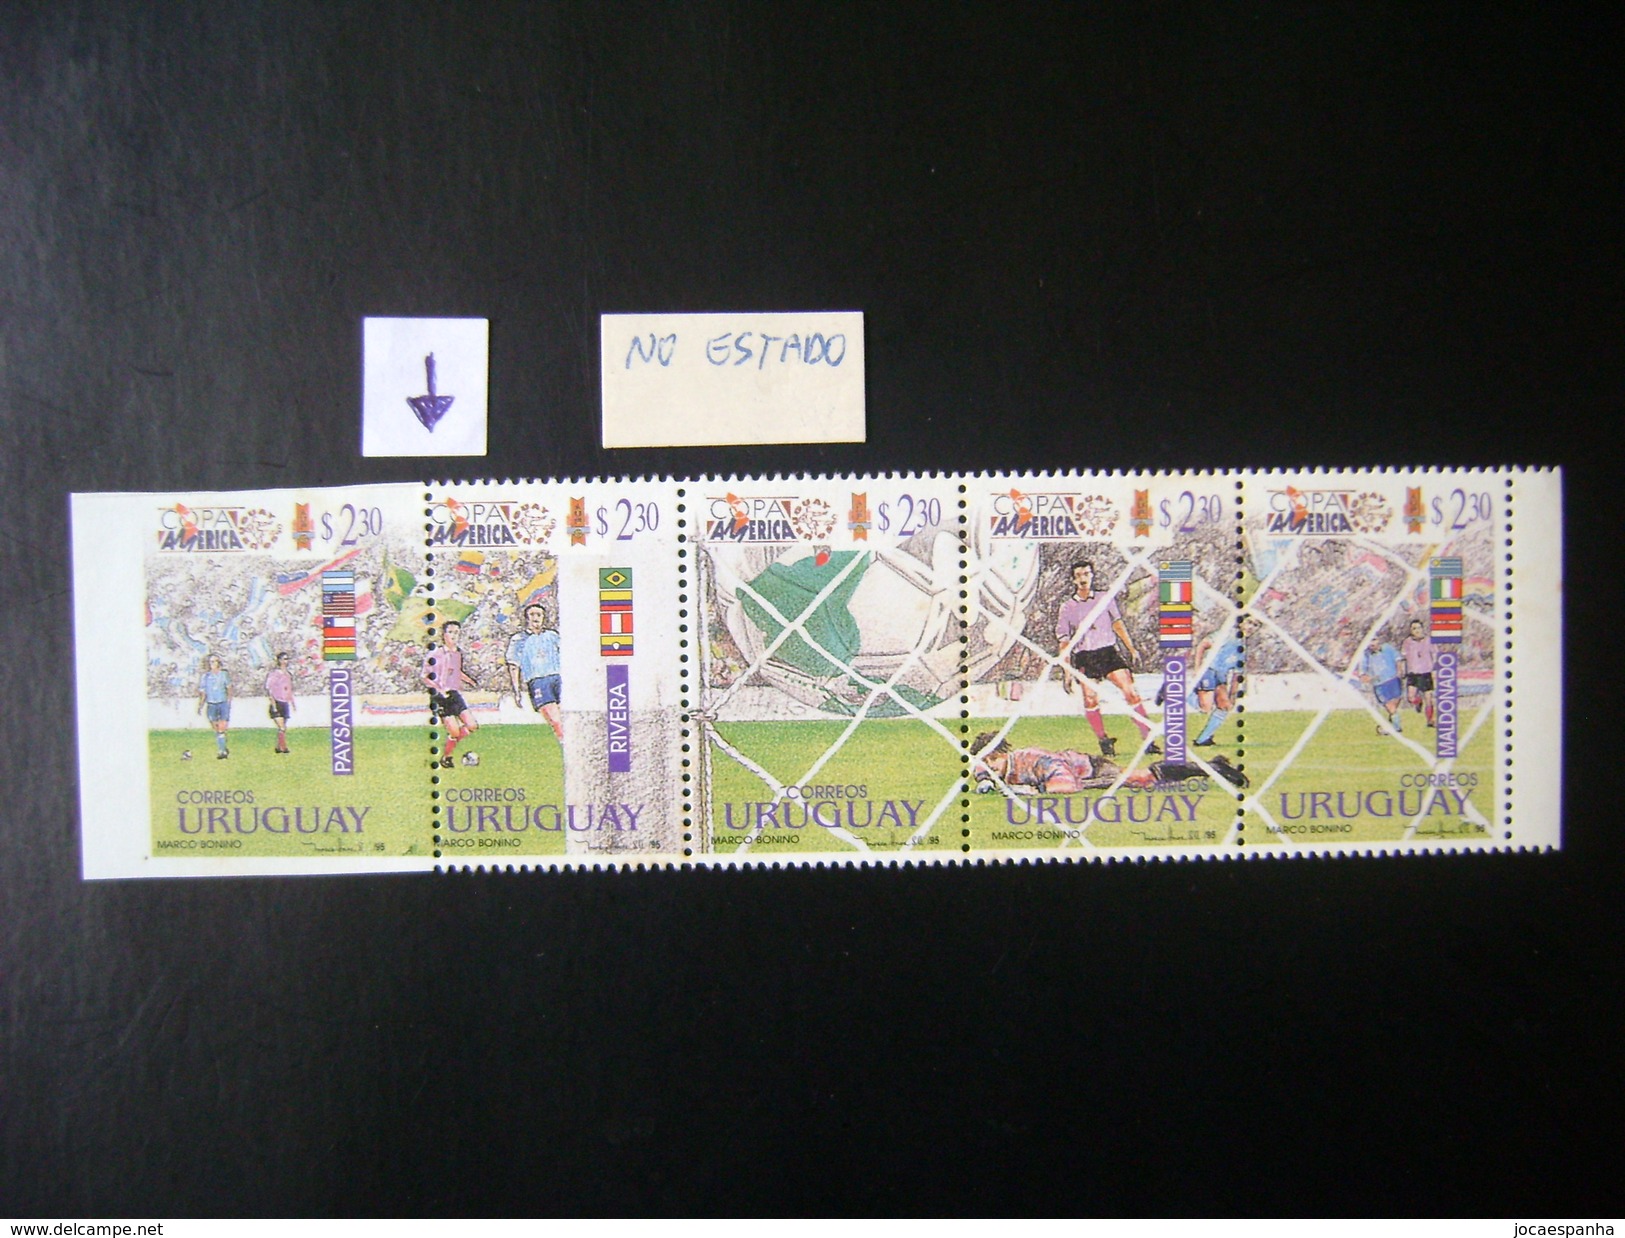 URUGUAY (COPA AMERICA 95) - COMPLETE STRIP WITH PICOTE DISPLACED IN 2 STAMPS - Copa América